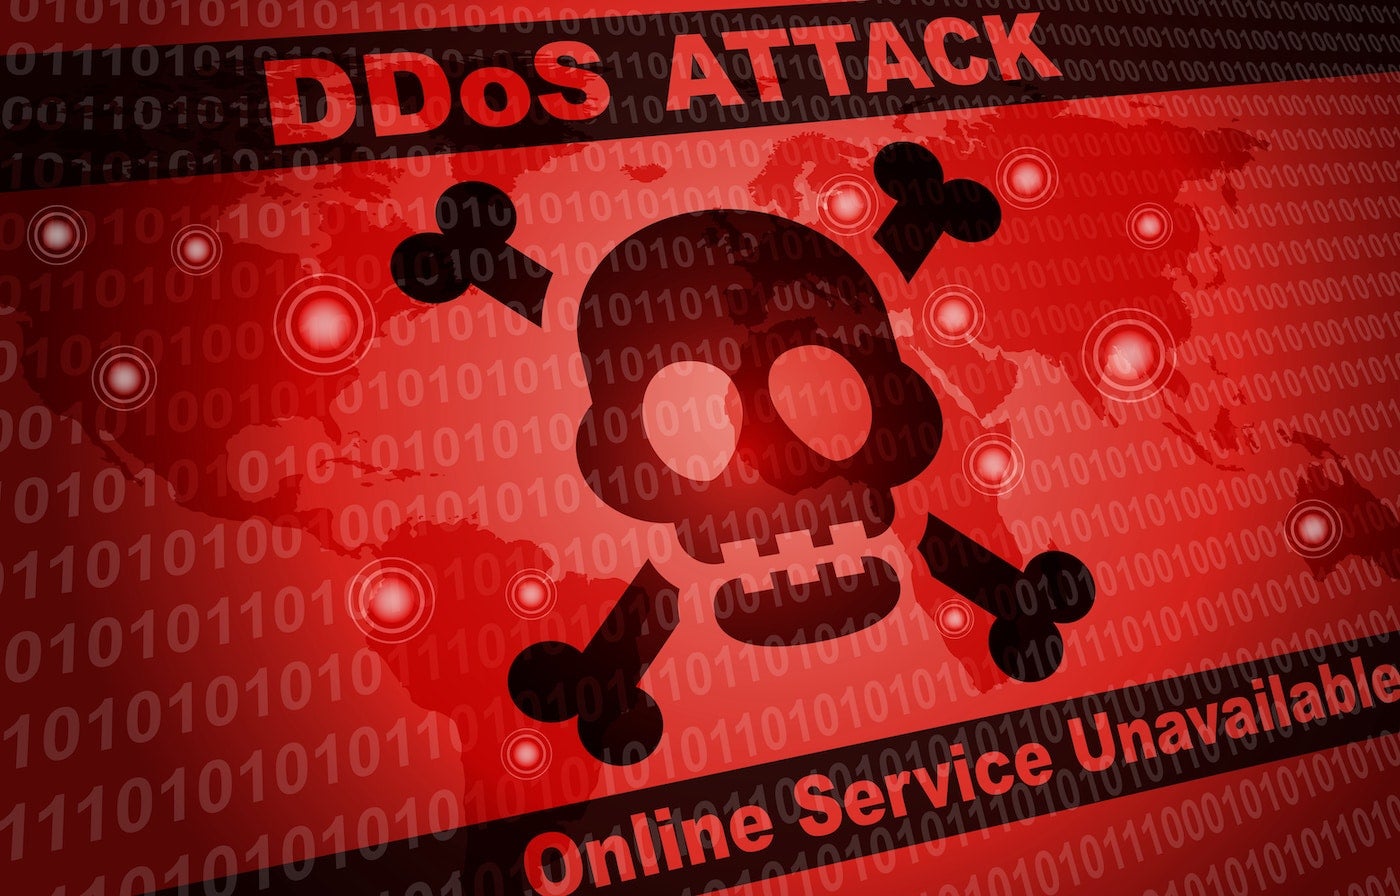 DDoS attack types and prevention